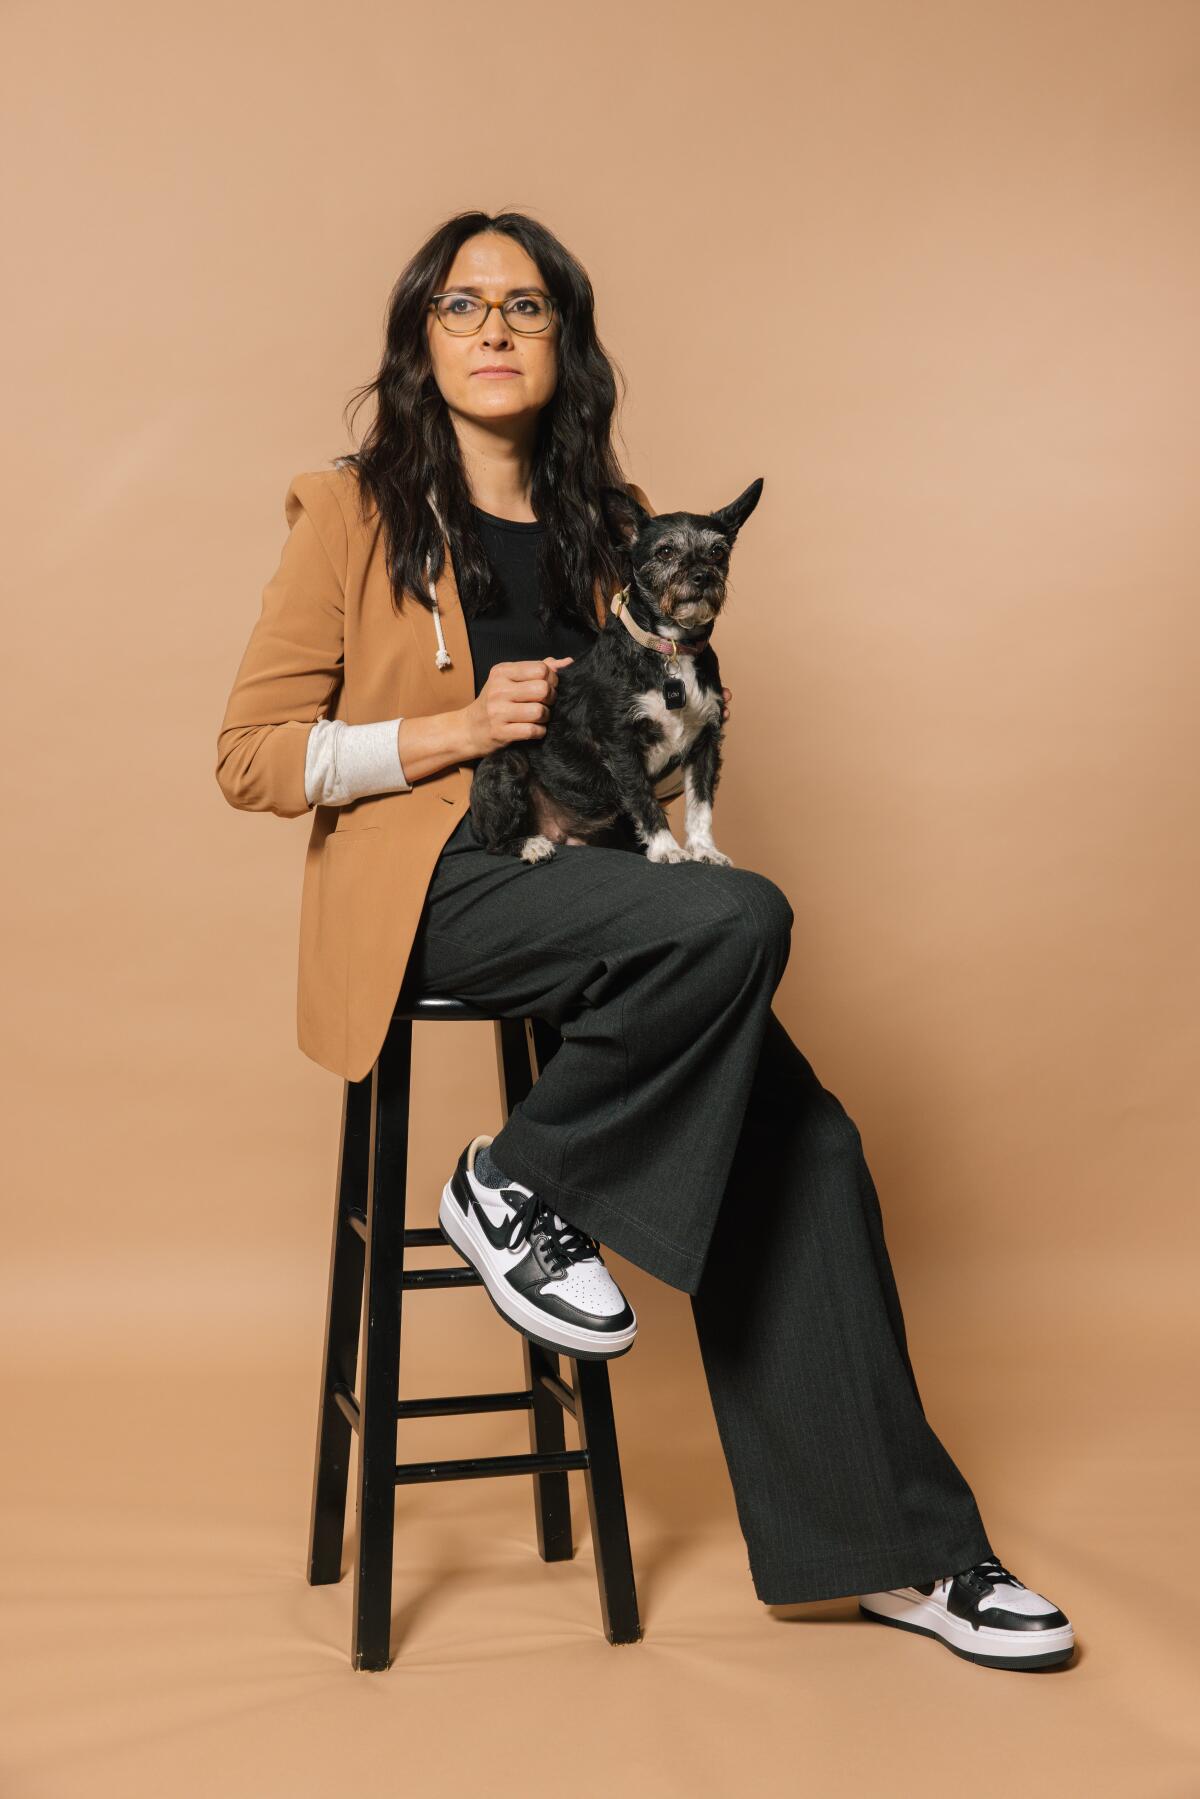  Syndey Freeland on a stool with her dog Echo